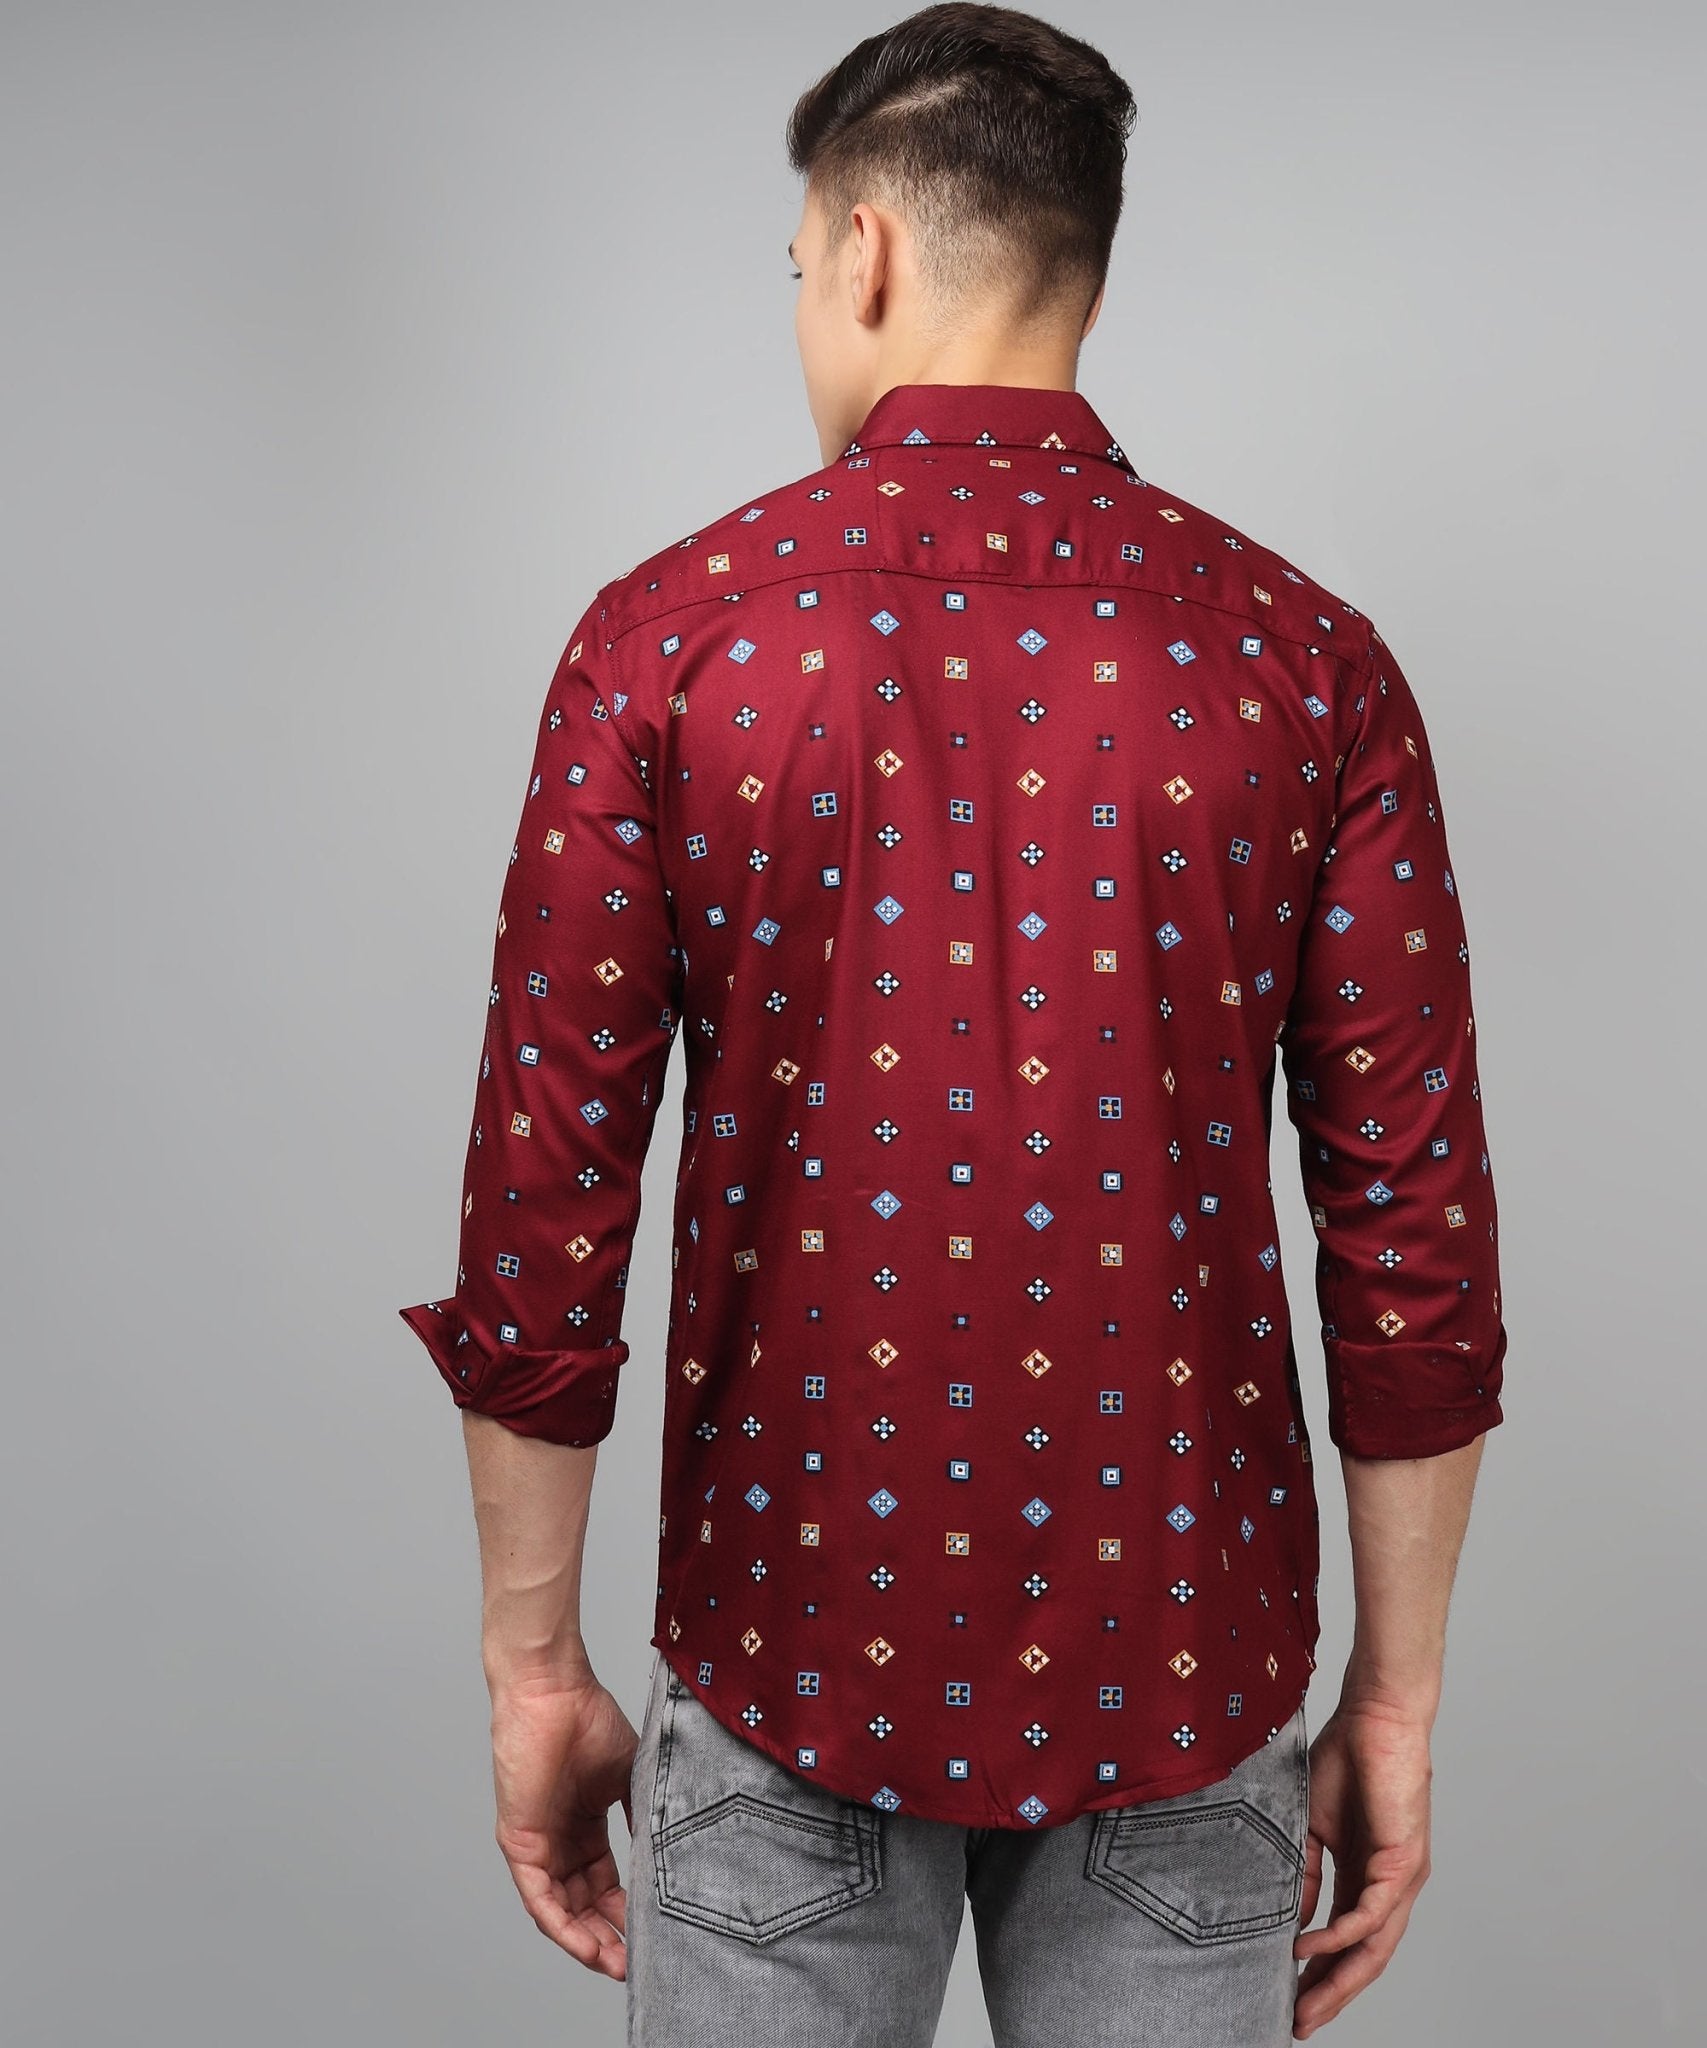 Fancy Trybuy Premium Printed Cotton Casual Shirt for Men - TryBuy® USA🇺🇸